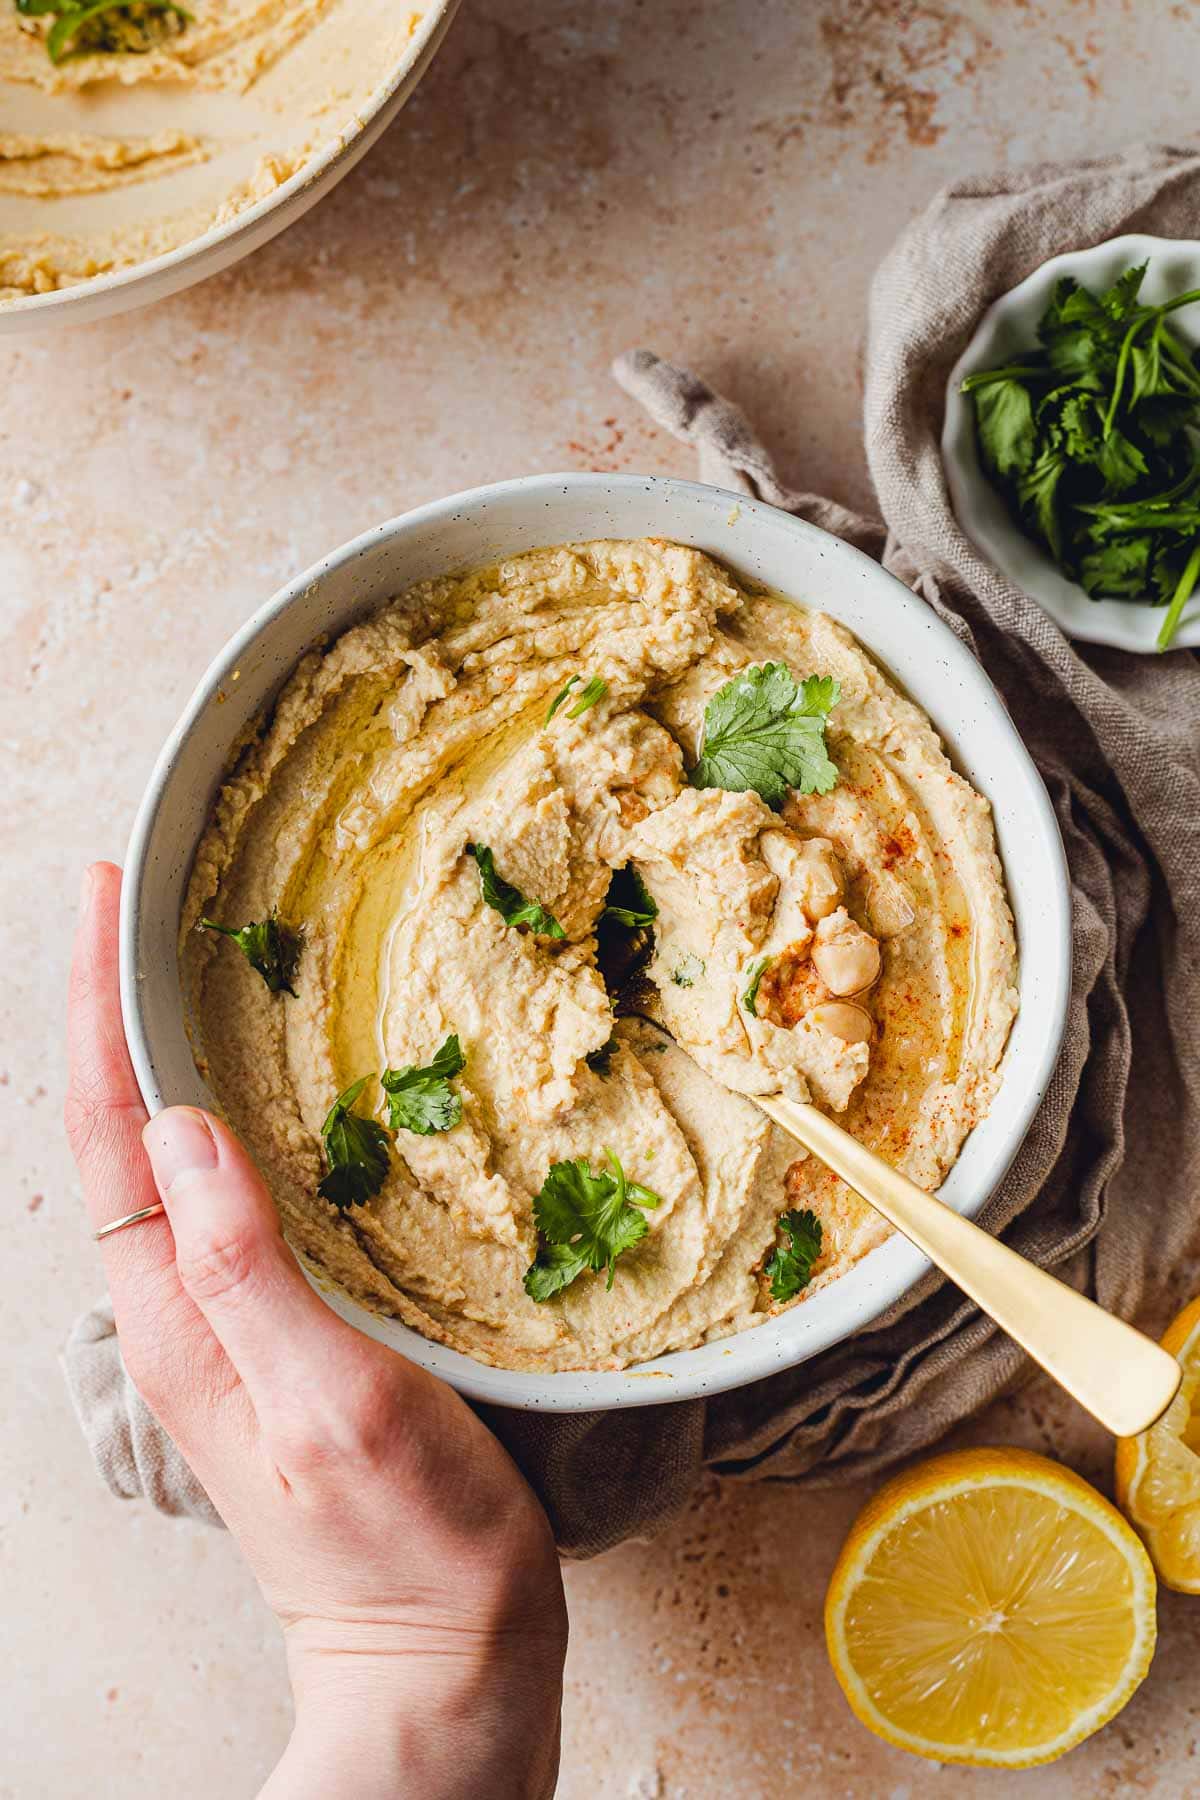 A bowl full of hummus with a hand holding the side of the bowl.